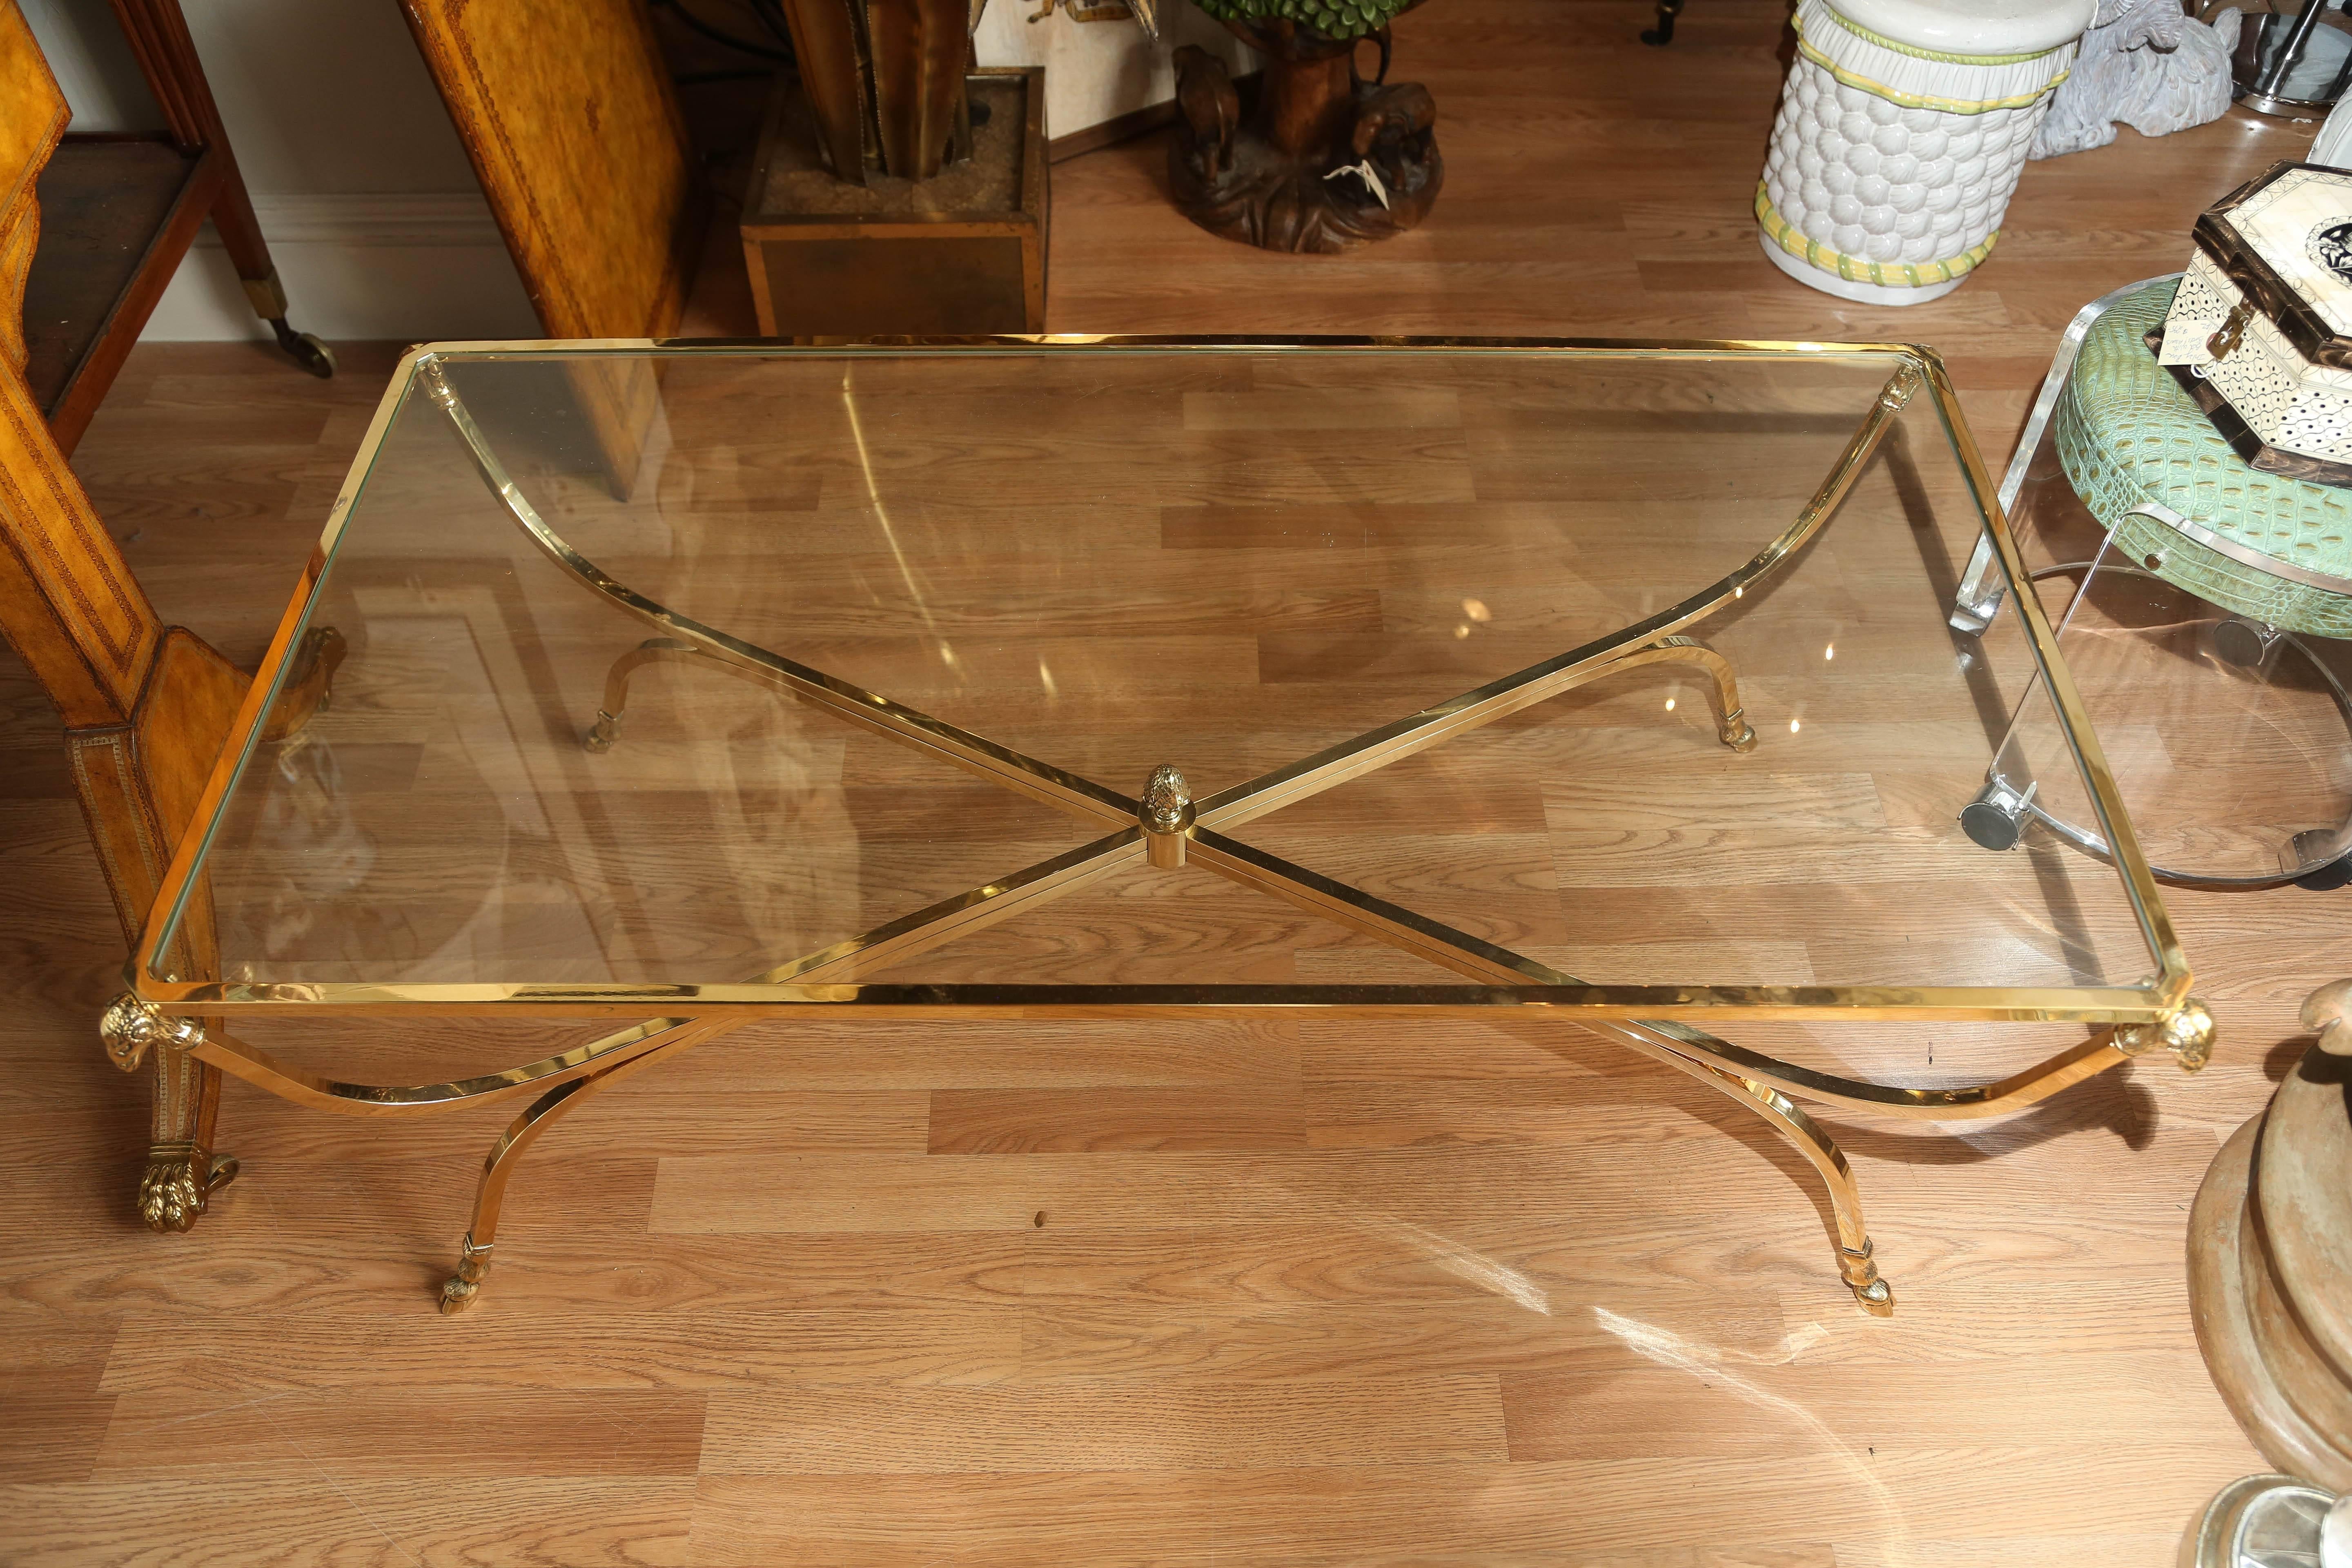 Solid brass rectangular coffee table with ram's heads on all corners and hoofed feet.